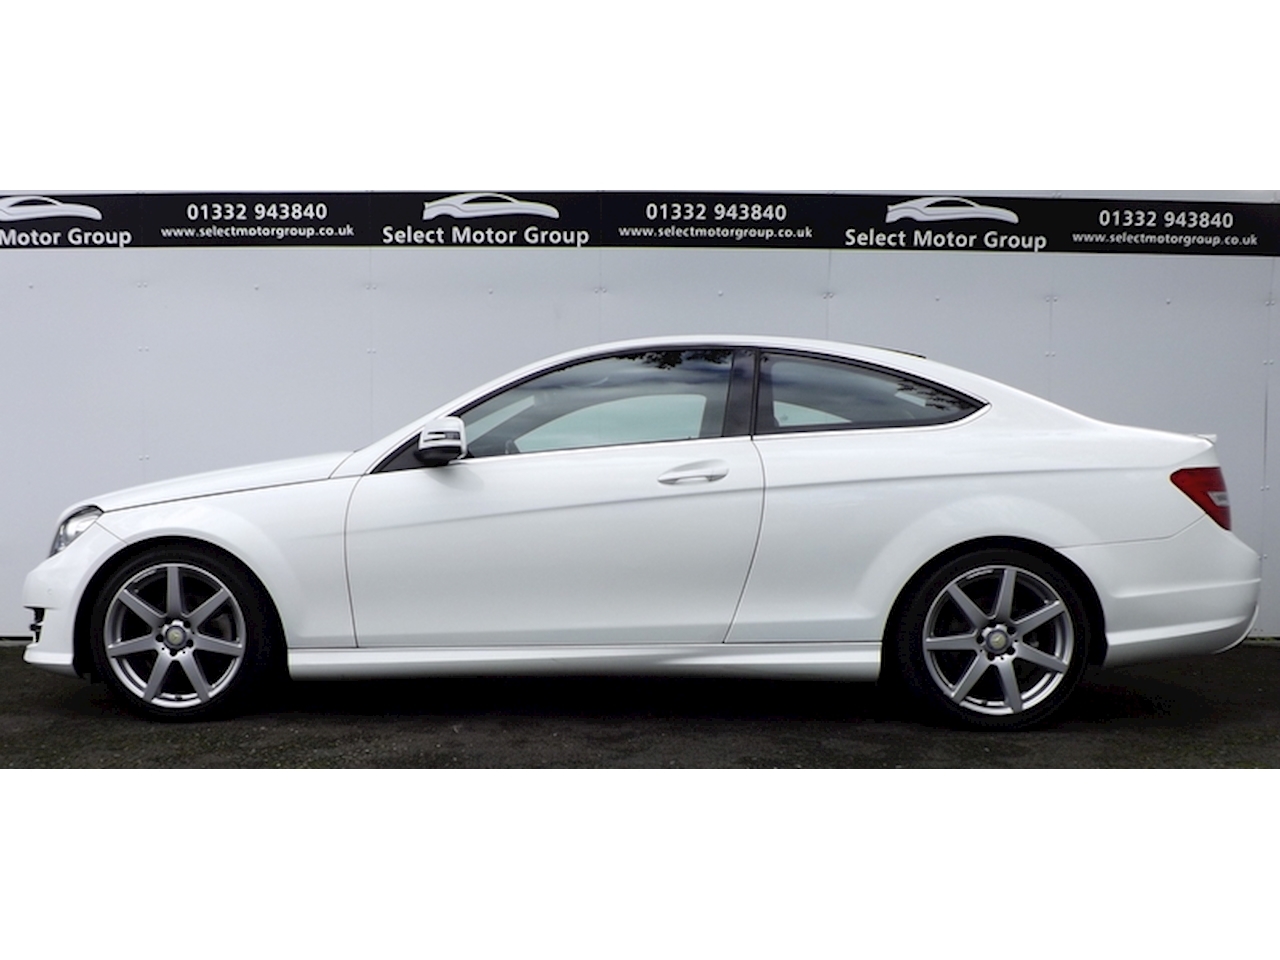 C Class 1.6 AMG Sport Edition Coupe 7G-Tronic Plus Petrol